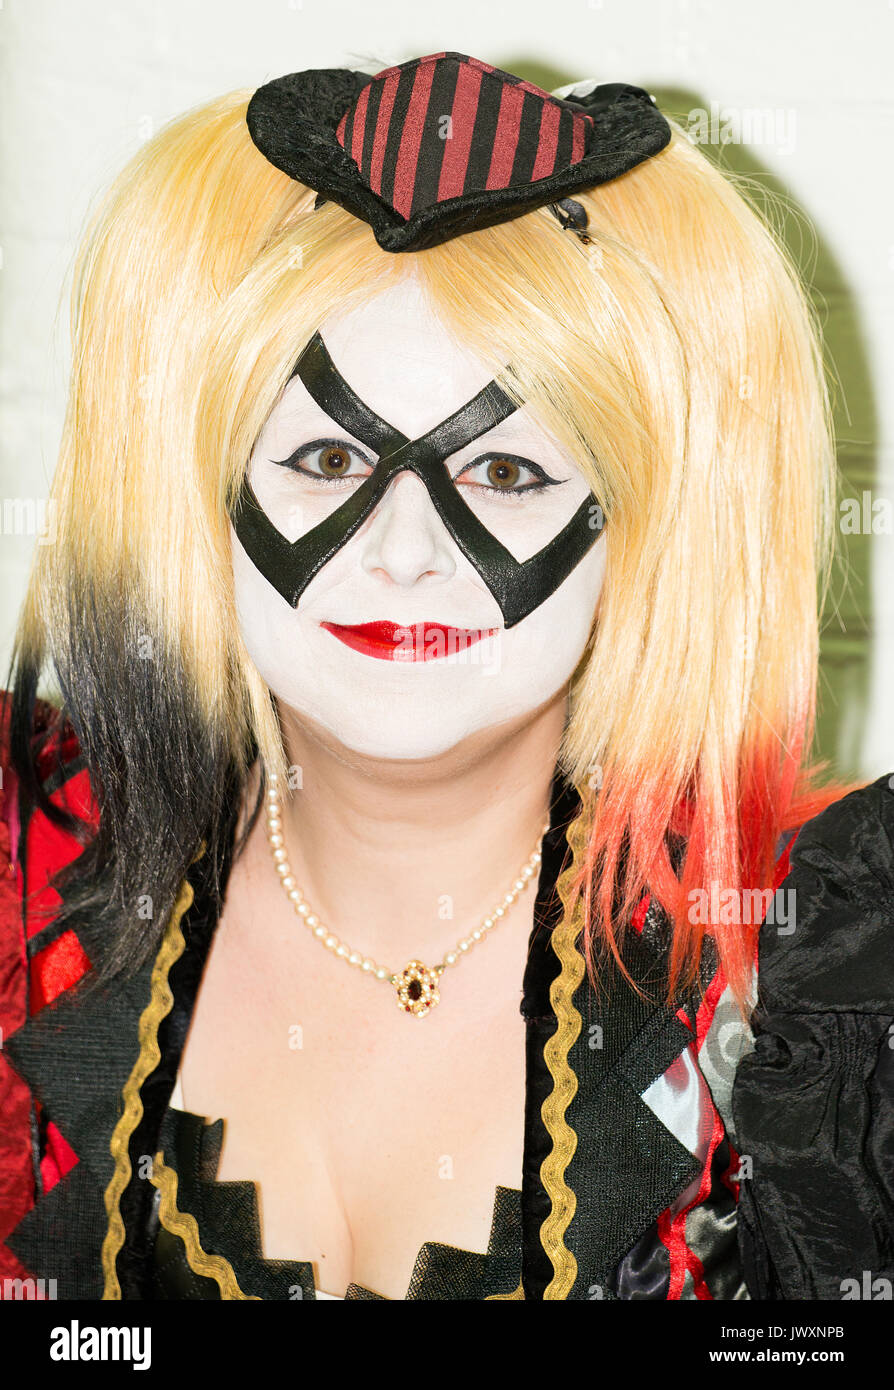 Woman dressed as Harley Quinn from the Batman comics at the London Film & Comic Con 2017 (Press pass/permission obtained from organisers). Stock Photo